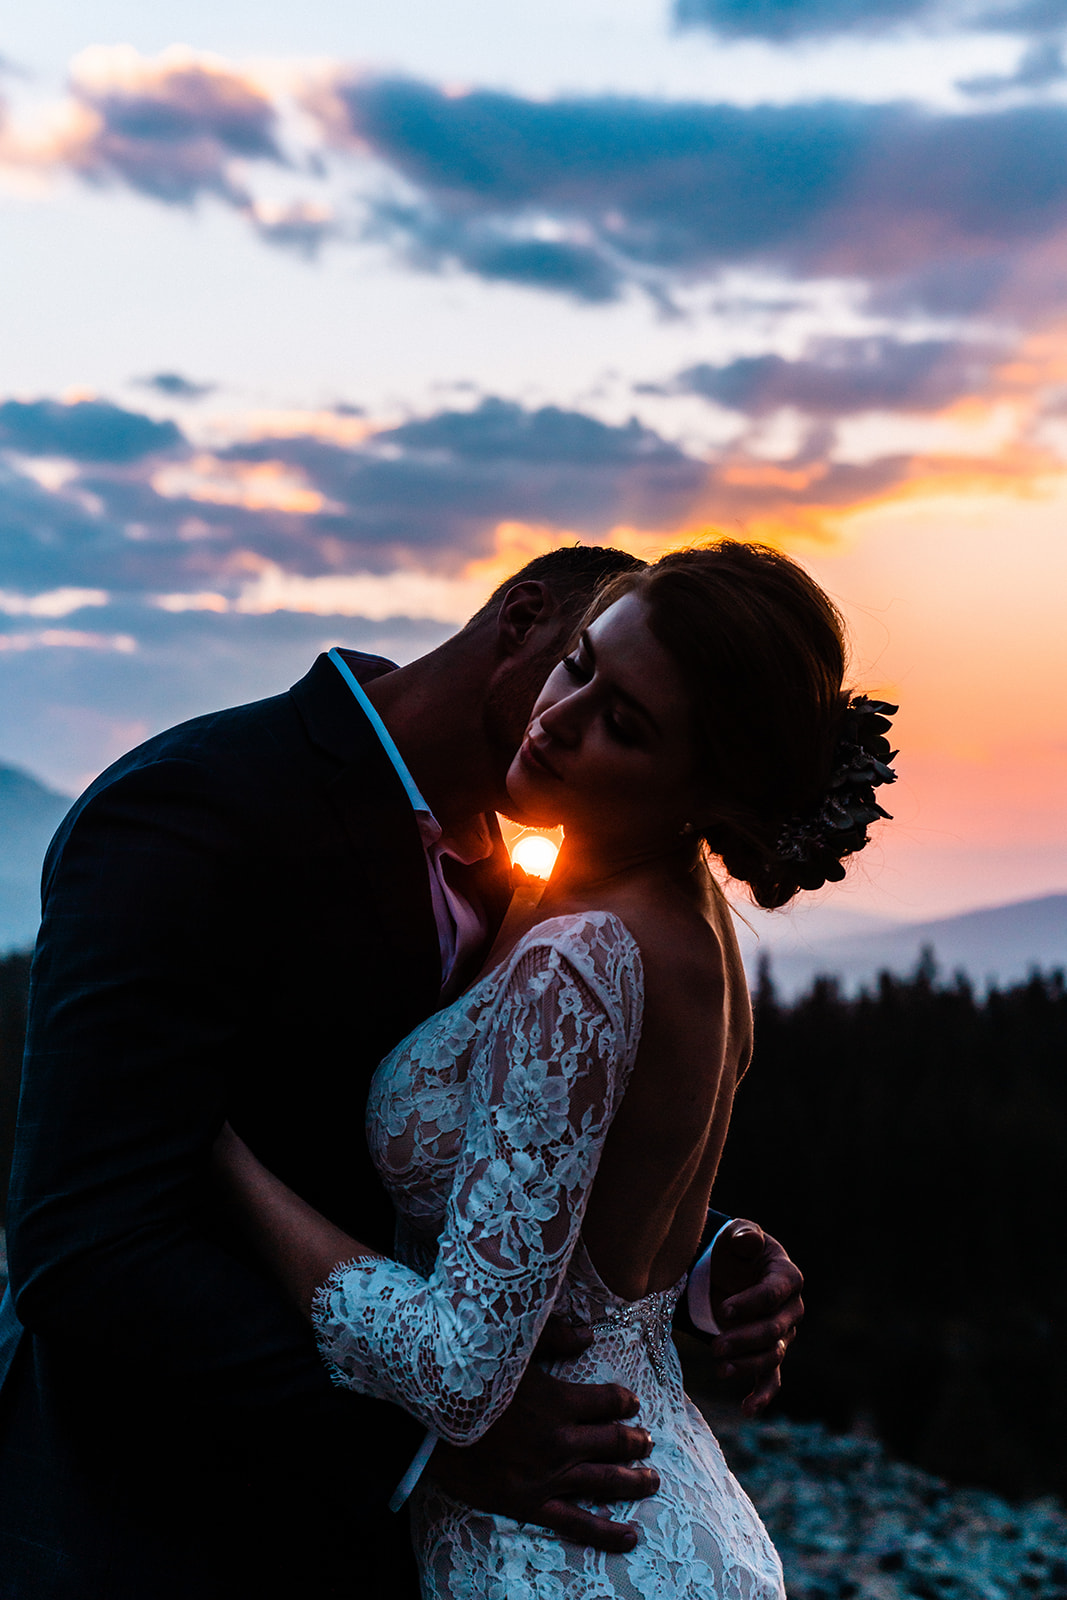 A bride and groom embrace at sunset.